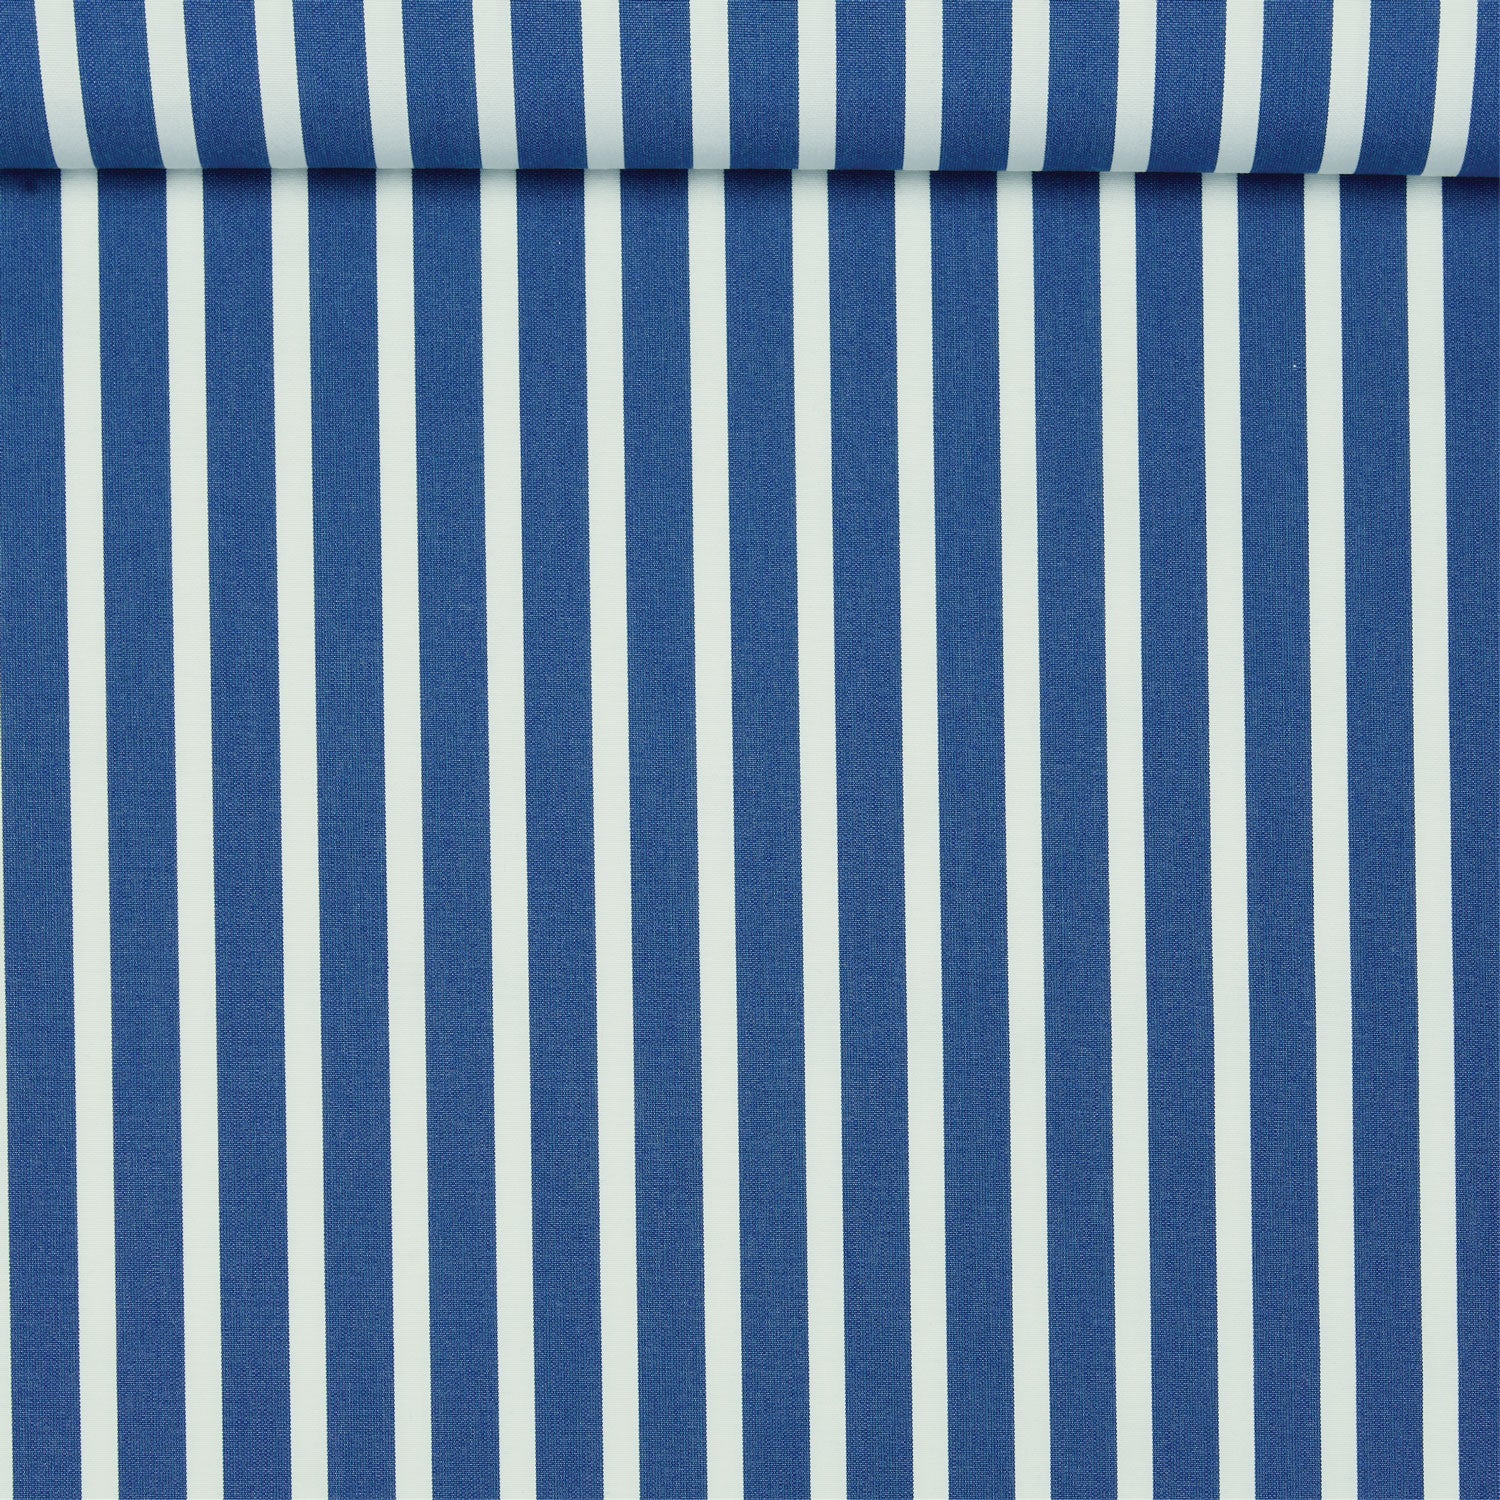 A birds eye view of a jacquard woven blue and white stripe pattern outdoor performance fabric roll. 